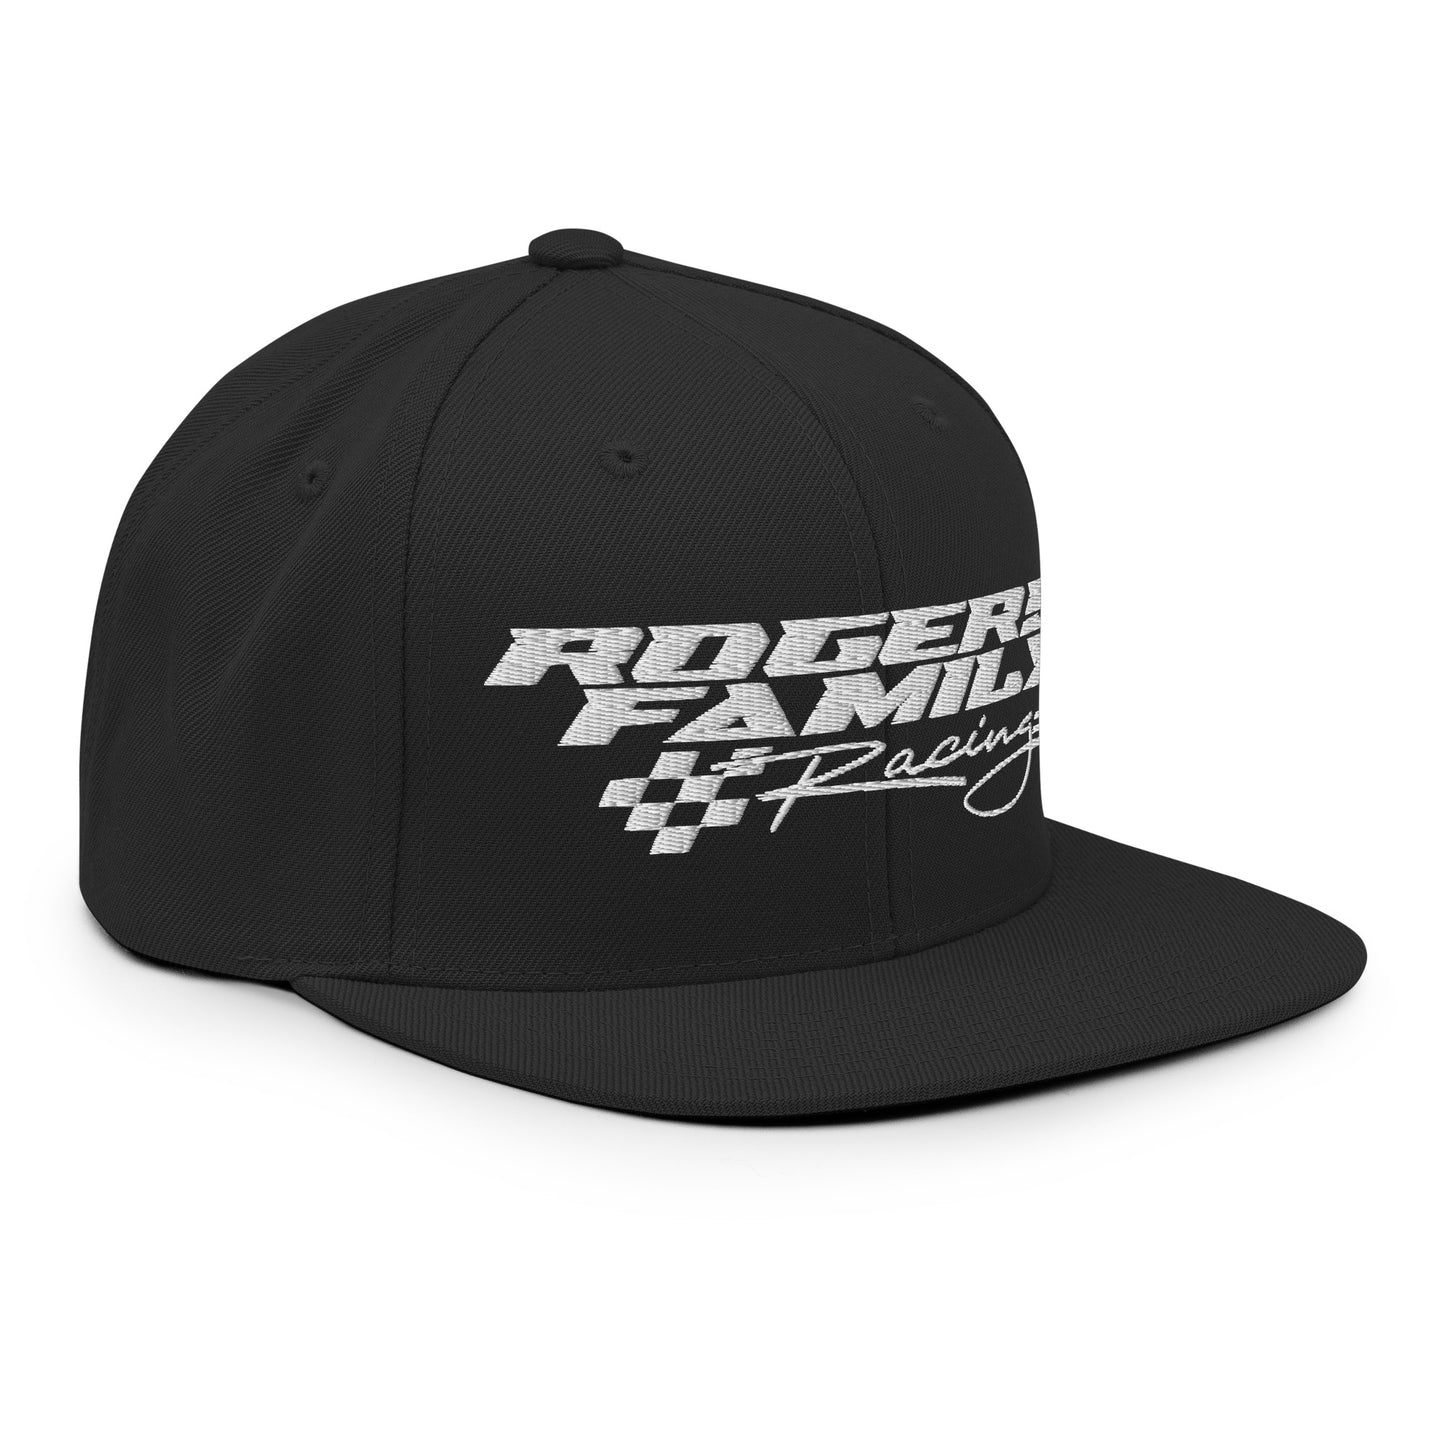 Rogers Family Racing Snapback Hat